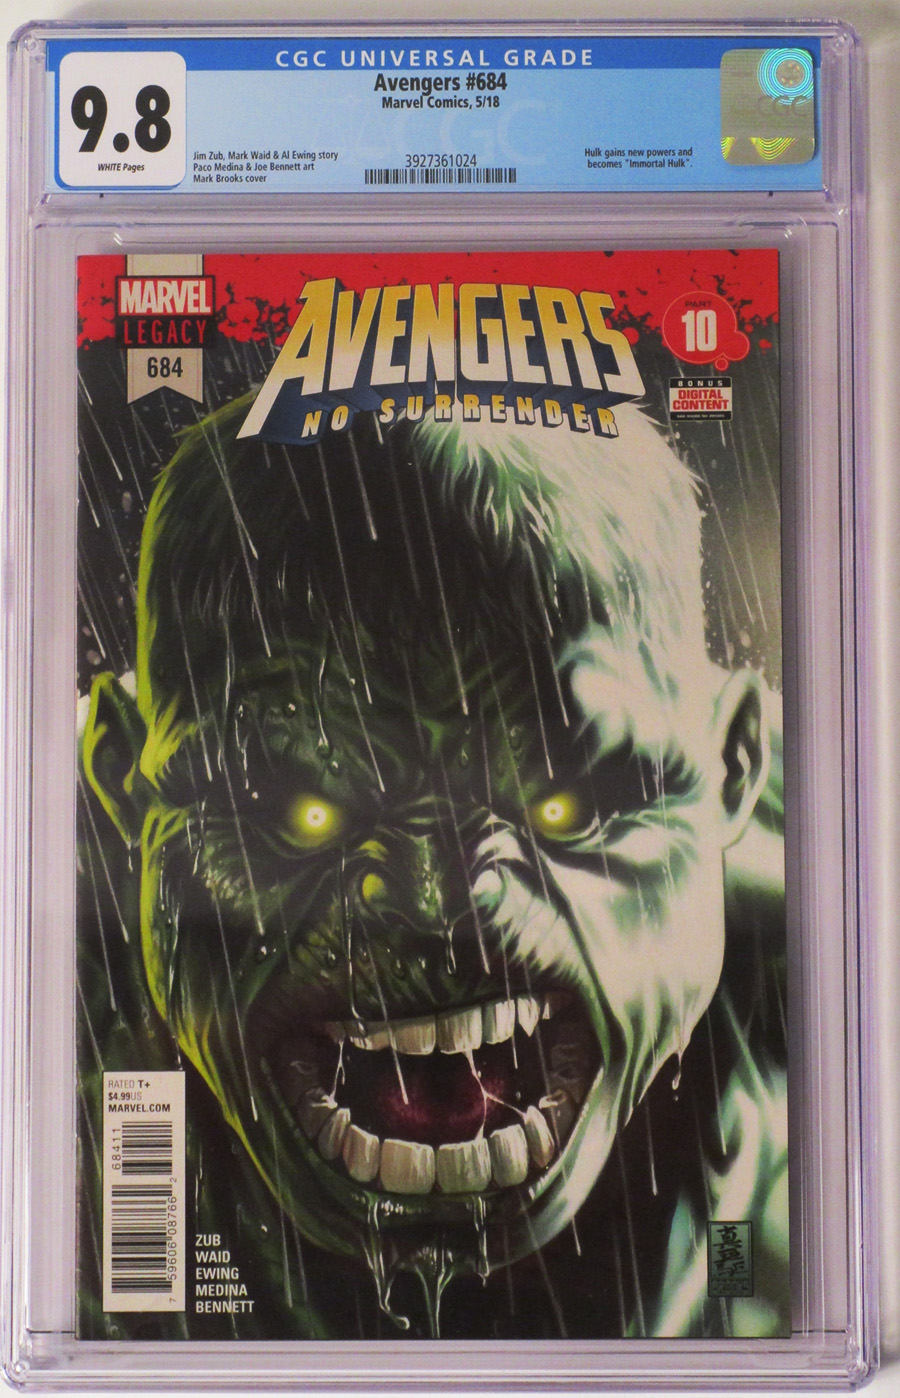 Avengers Vol 6 #684 Cover D Regular Mark Brooks Cover (No Surrender Part 10)(Marvel Legacy Tie-In) CGC 9.8